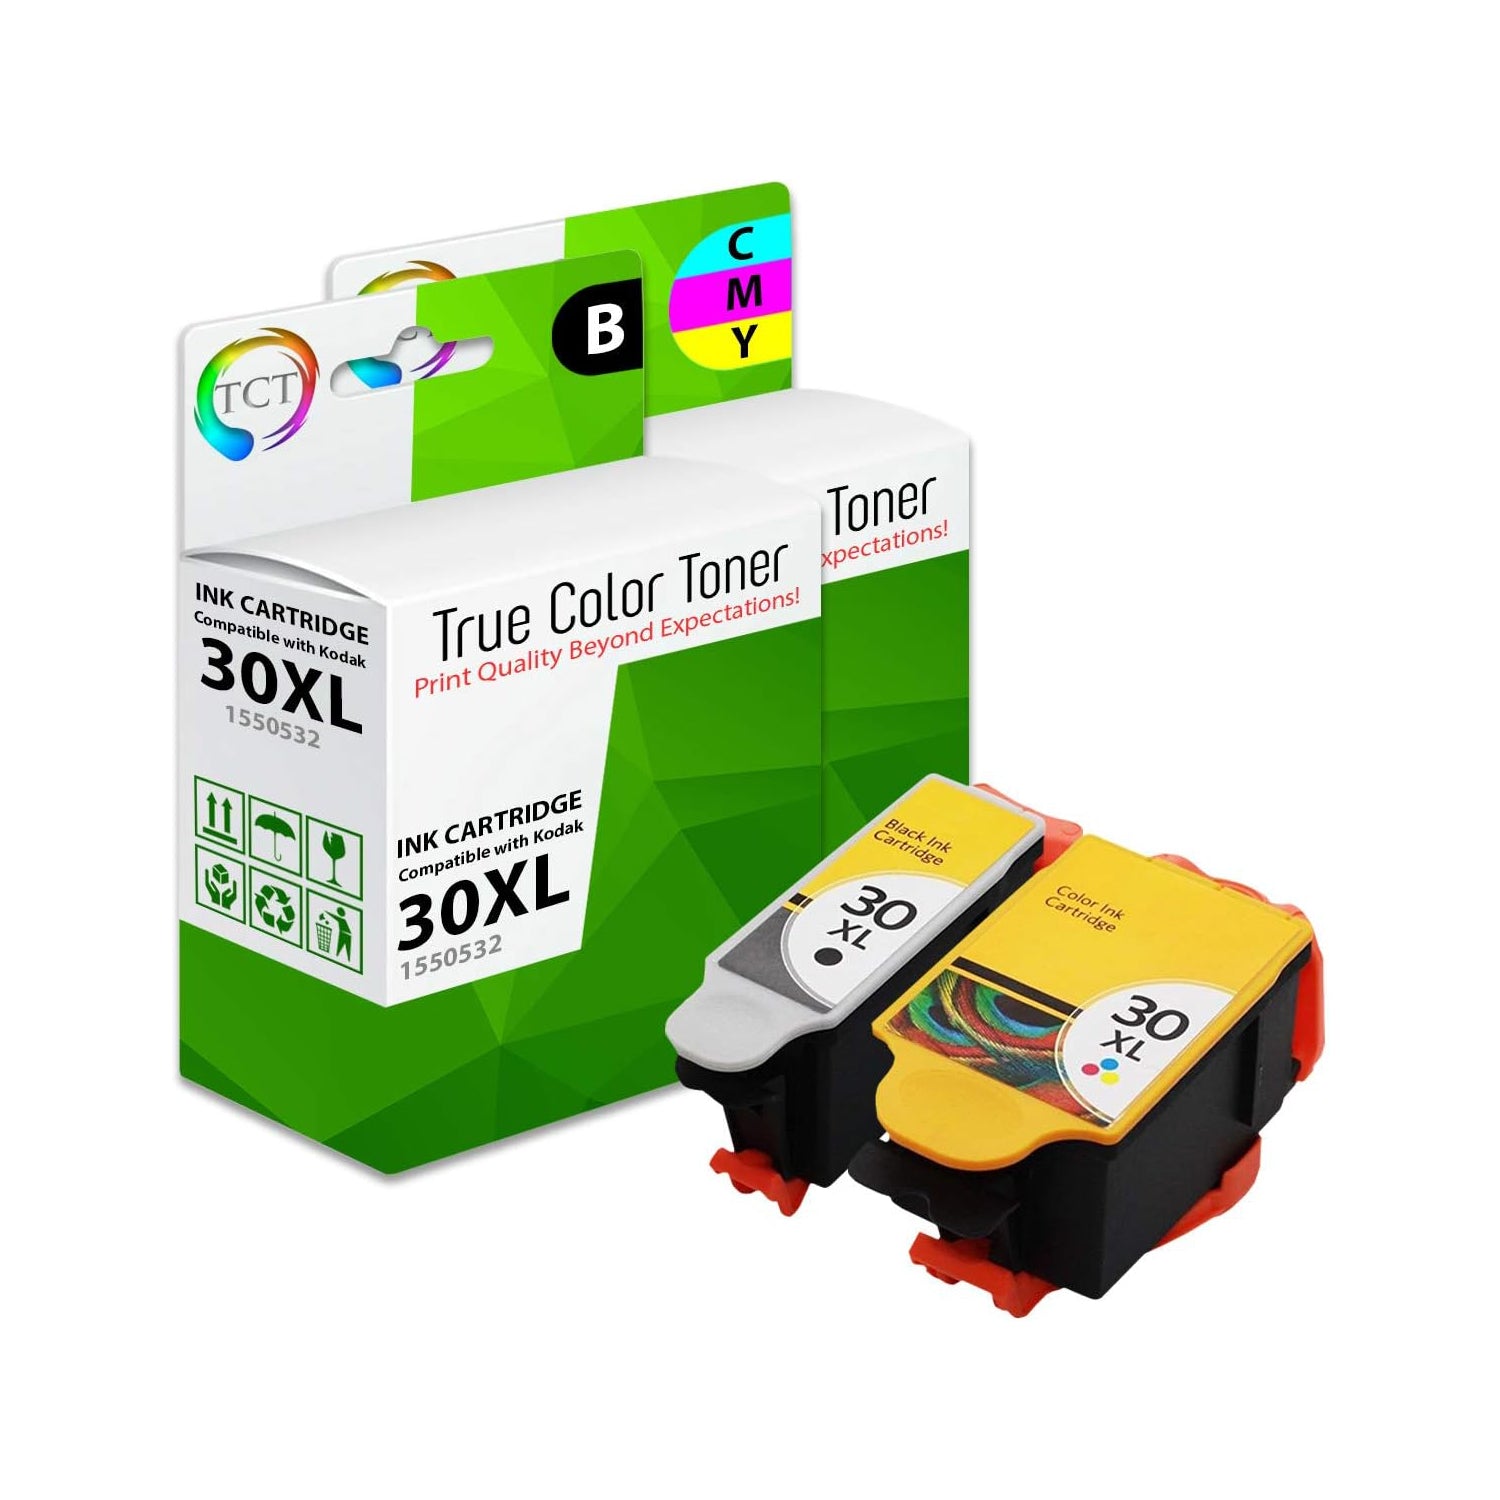 TCT Compatible High Yield Ink Cartridge Replacement for the Kodak 30XL Series - 2 Pack (BK, CL)